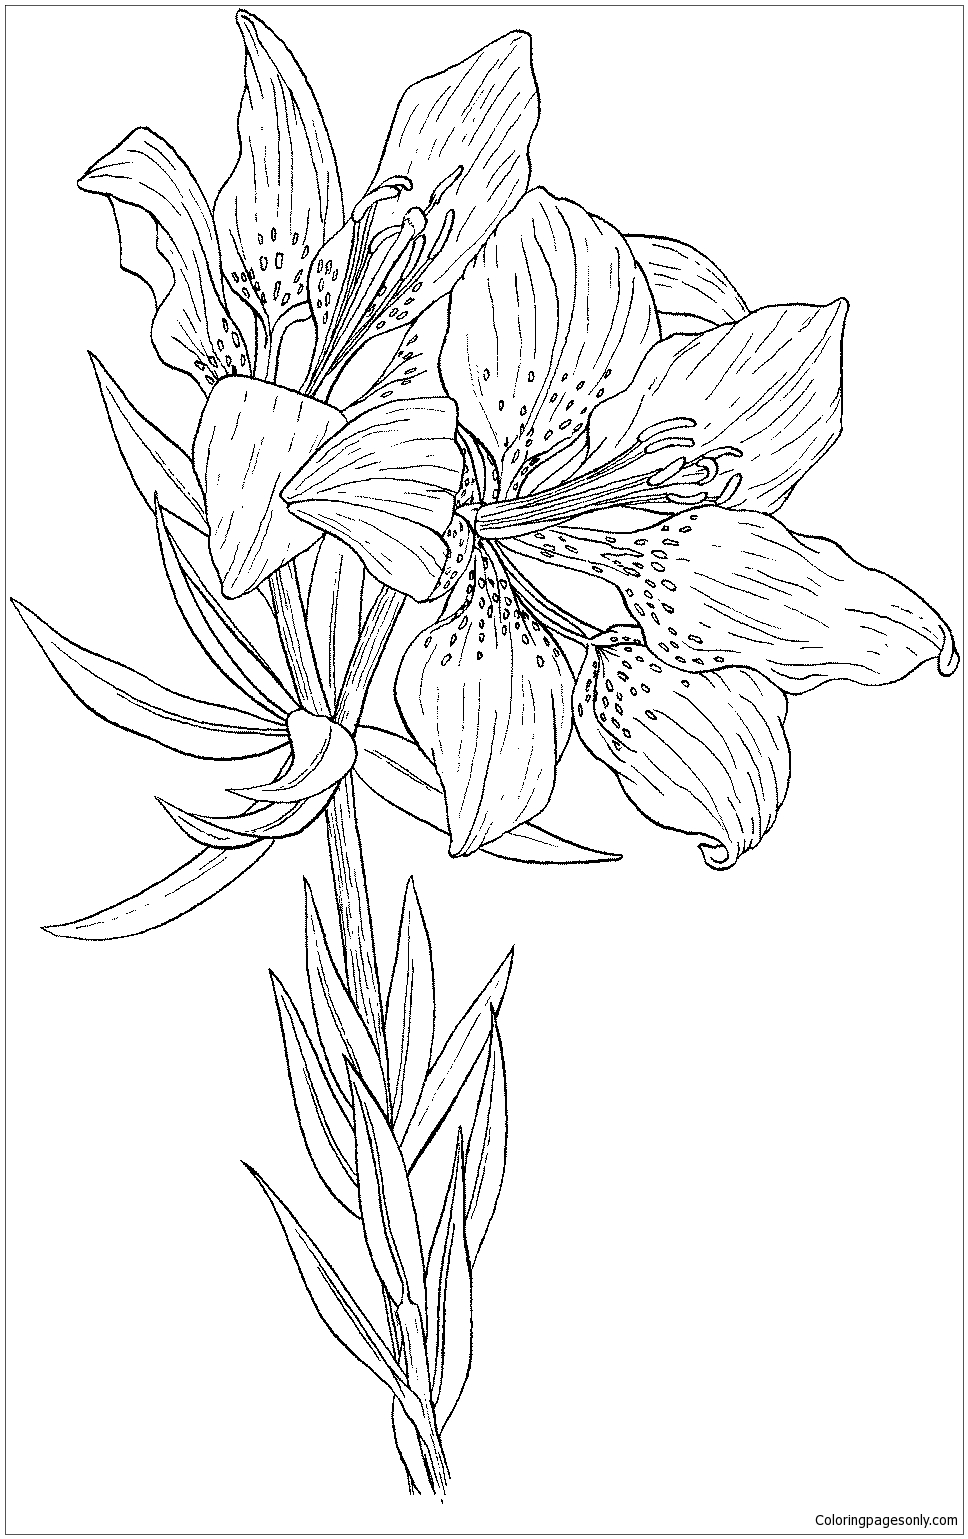 Lilium Philadelphicum or Wild Orange Red Lily Coloring Pages